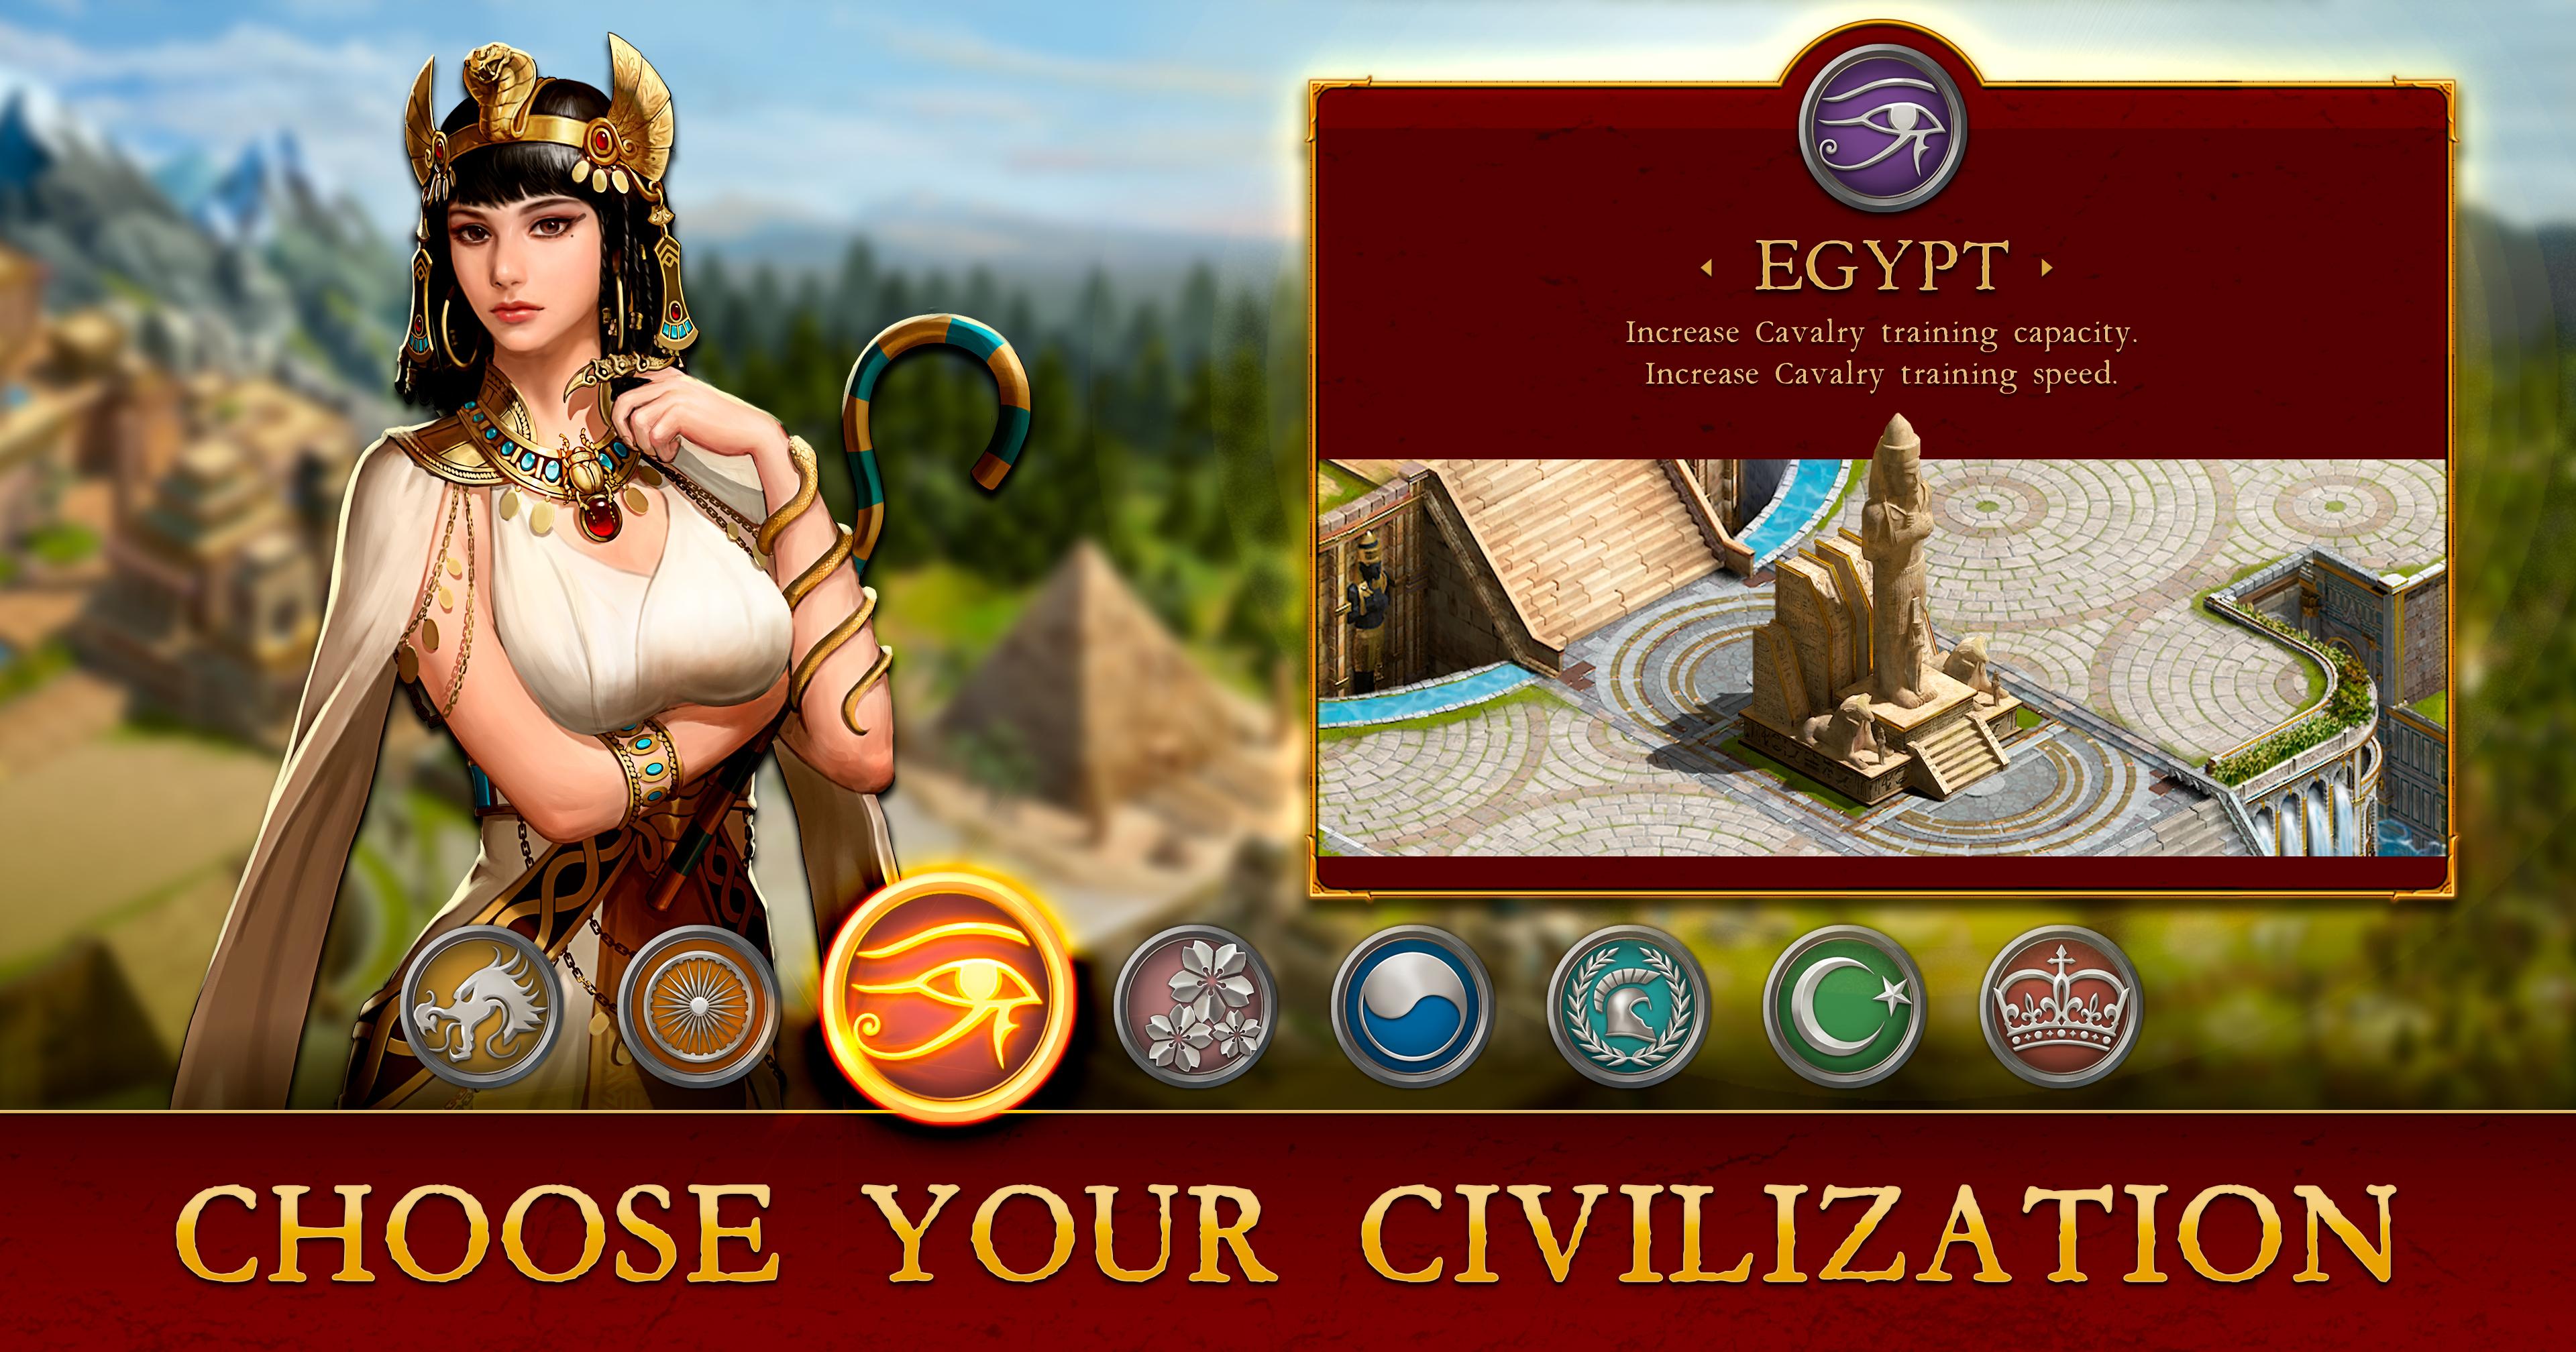 Civilization War (ROE) for Android APK Download